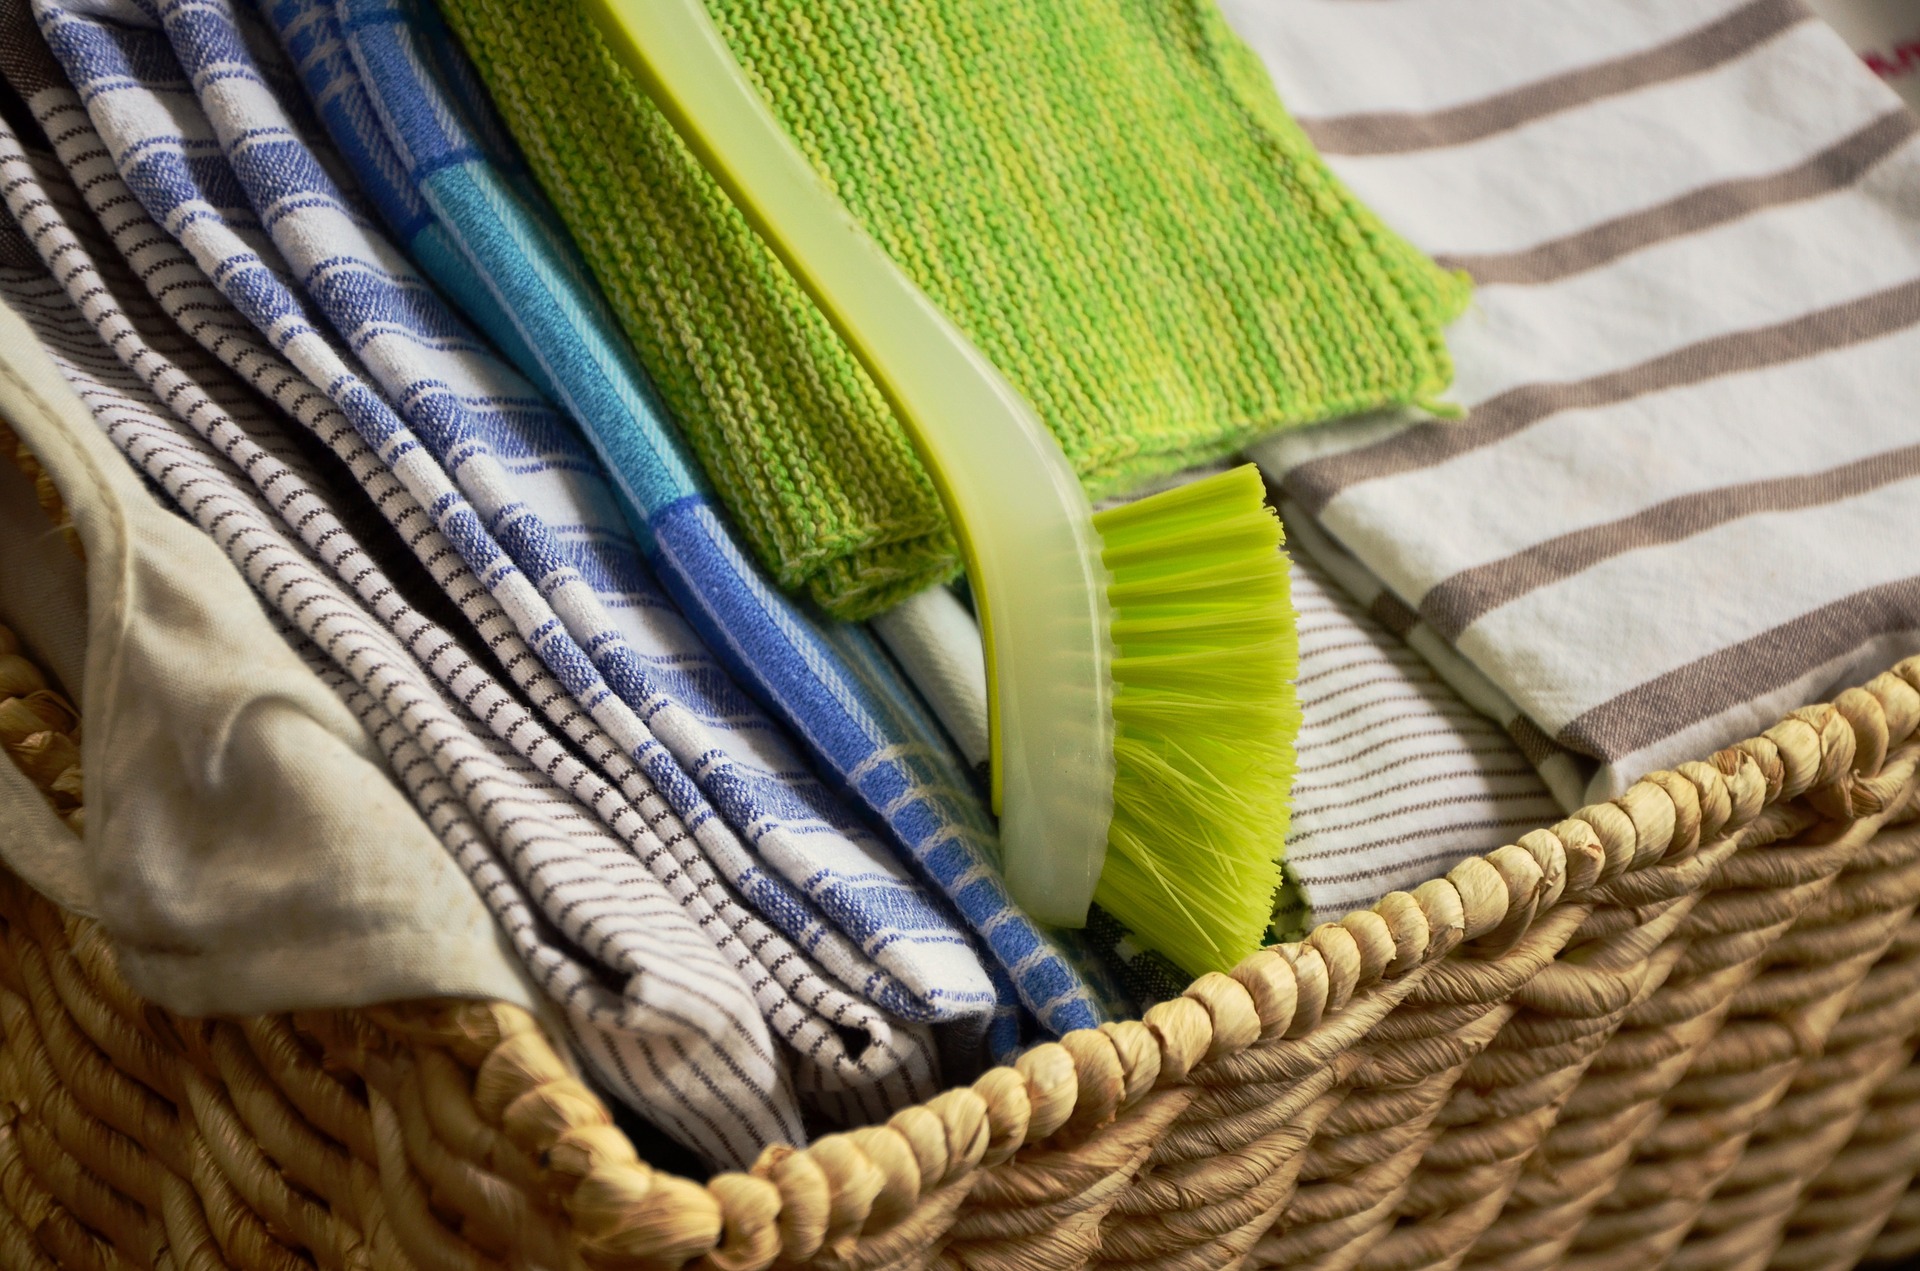 https://happilyblended.com/wp-content/uploads/2016/08/7-Tips-for-Organizing-Your-Tea-Towels-and-Other-Kitchen-Materials.jpg